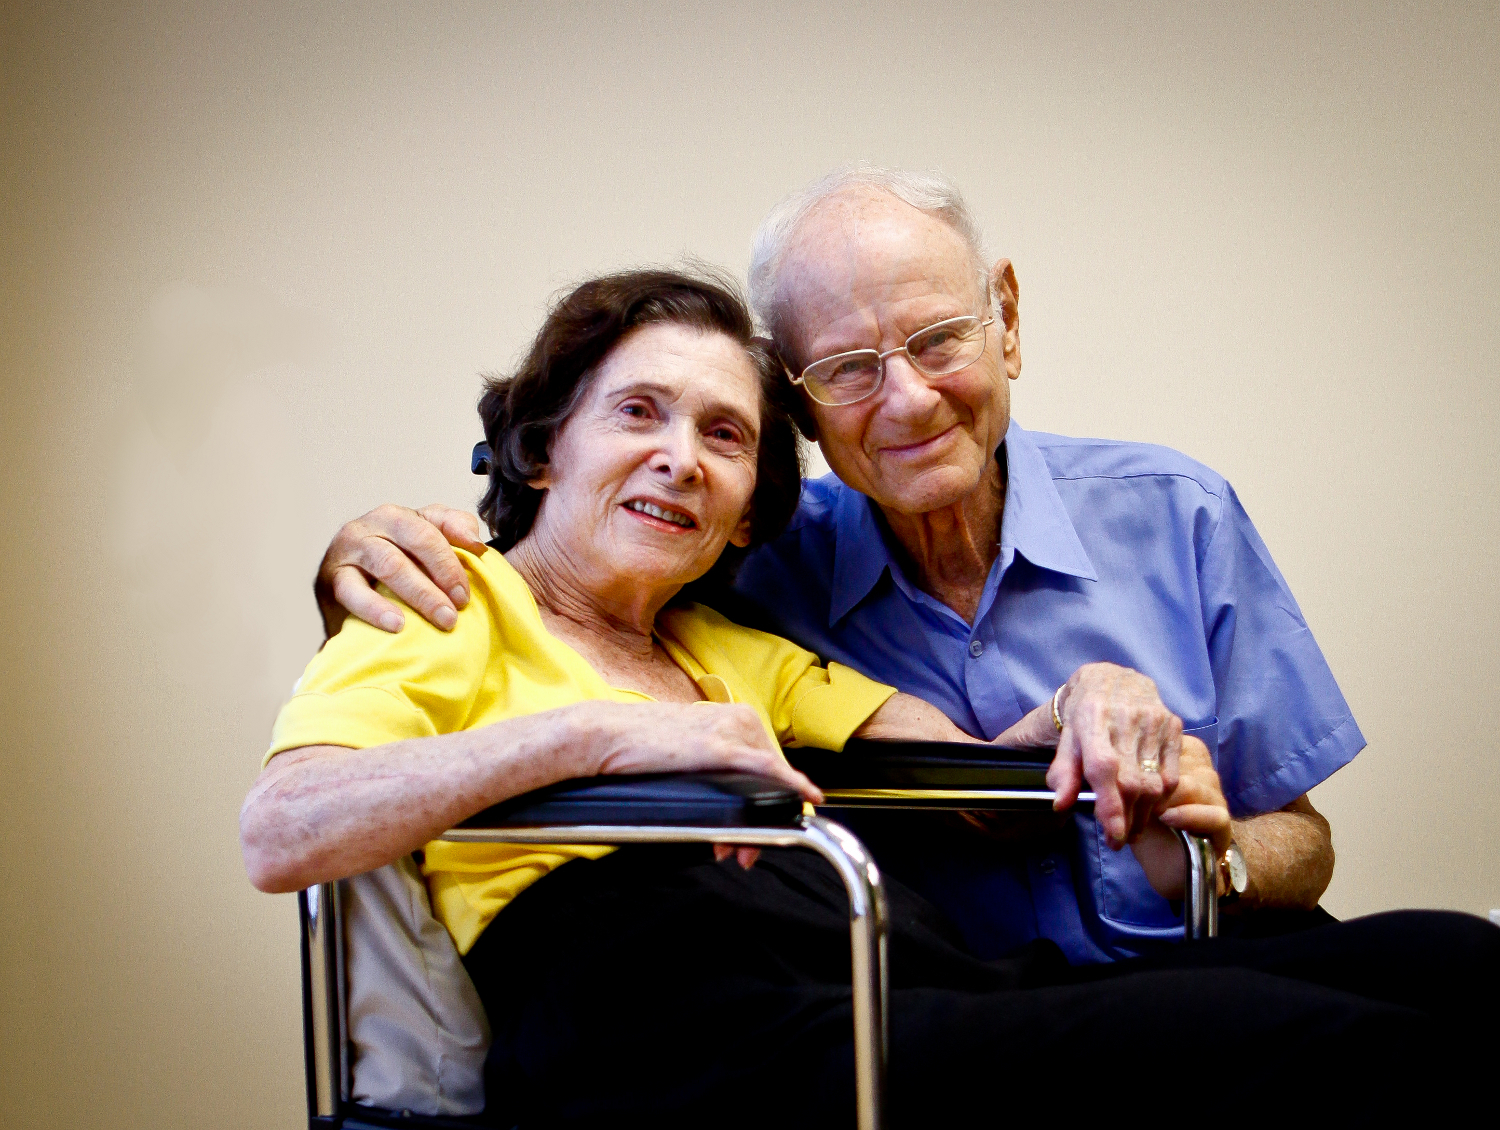 Alisa and Ernie Kretzmer have been longtime patrons and donors to numerous local arts organizations including the ballet, the Sarasota Orchestra and Sarasota Opera.